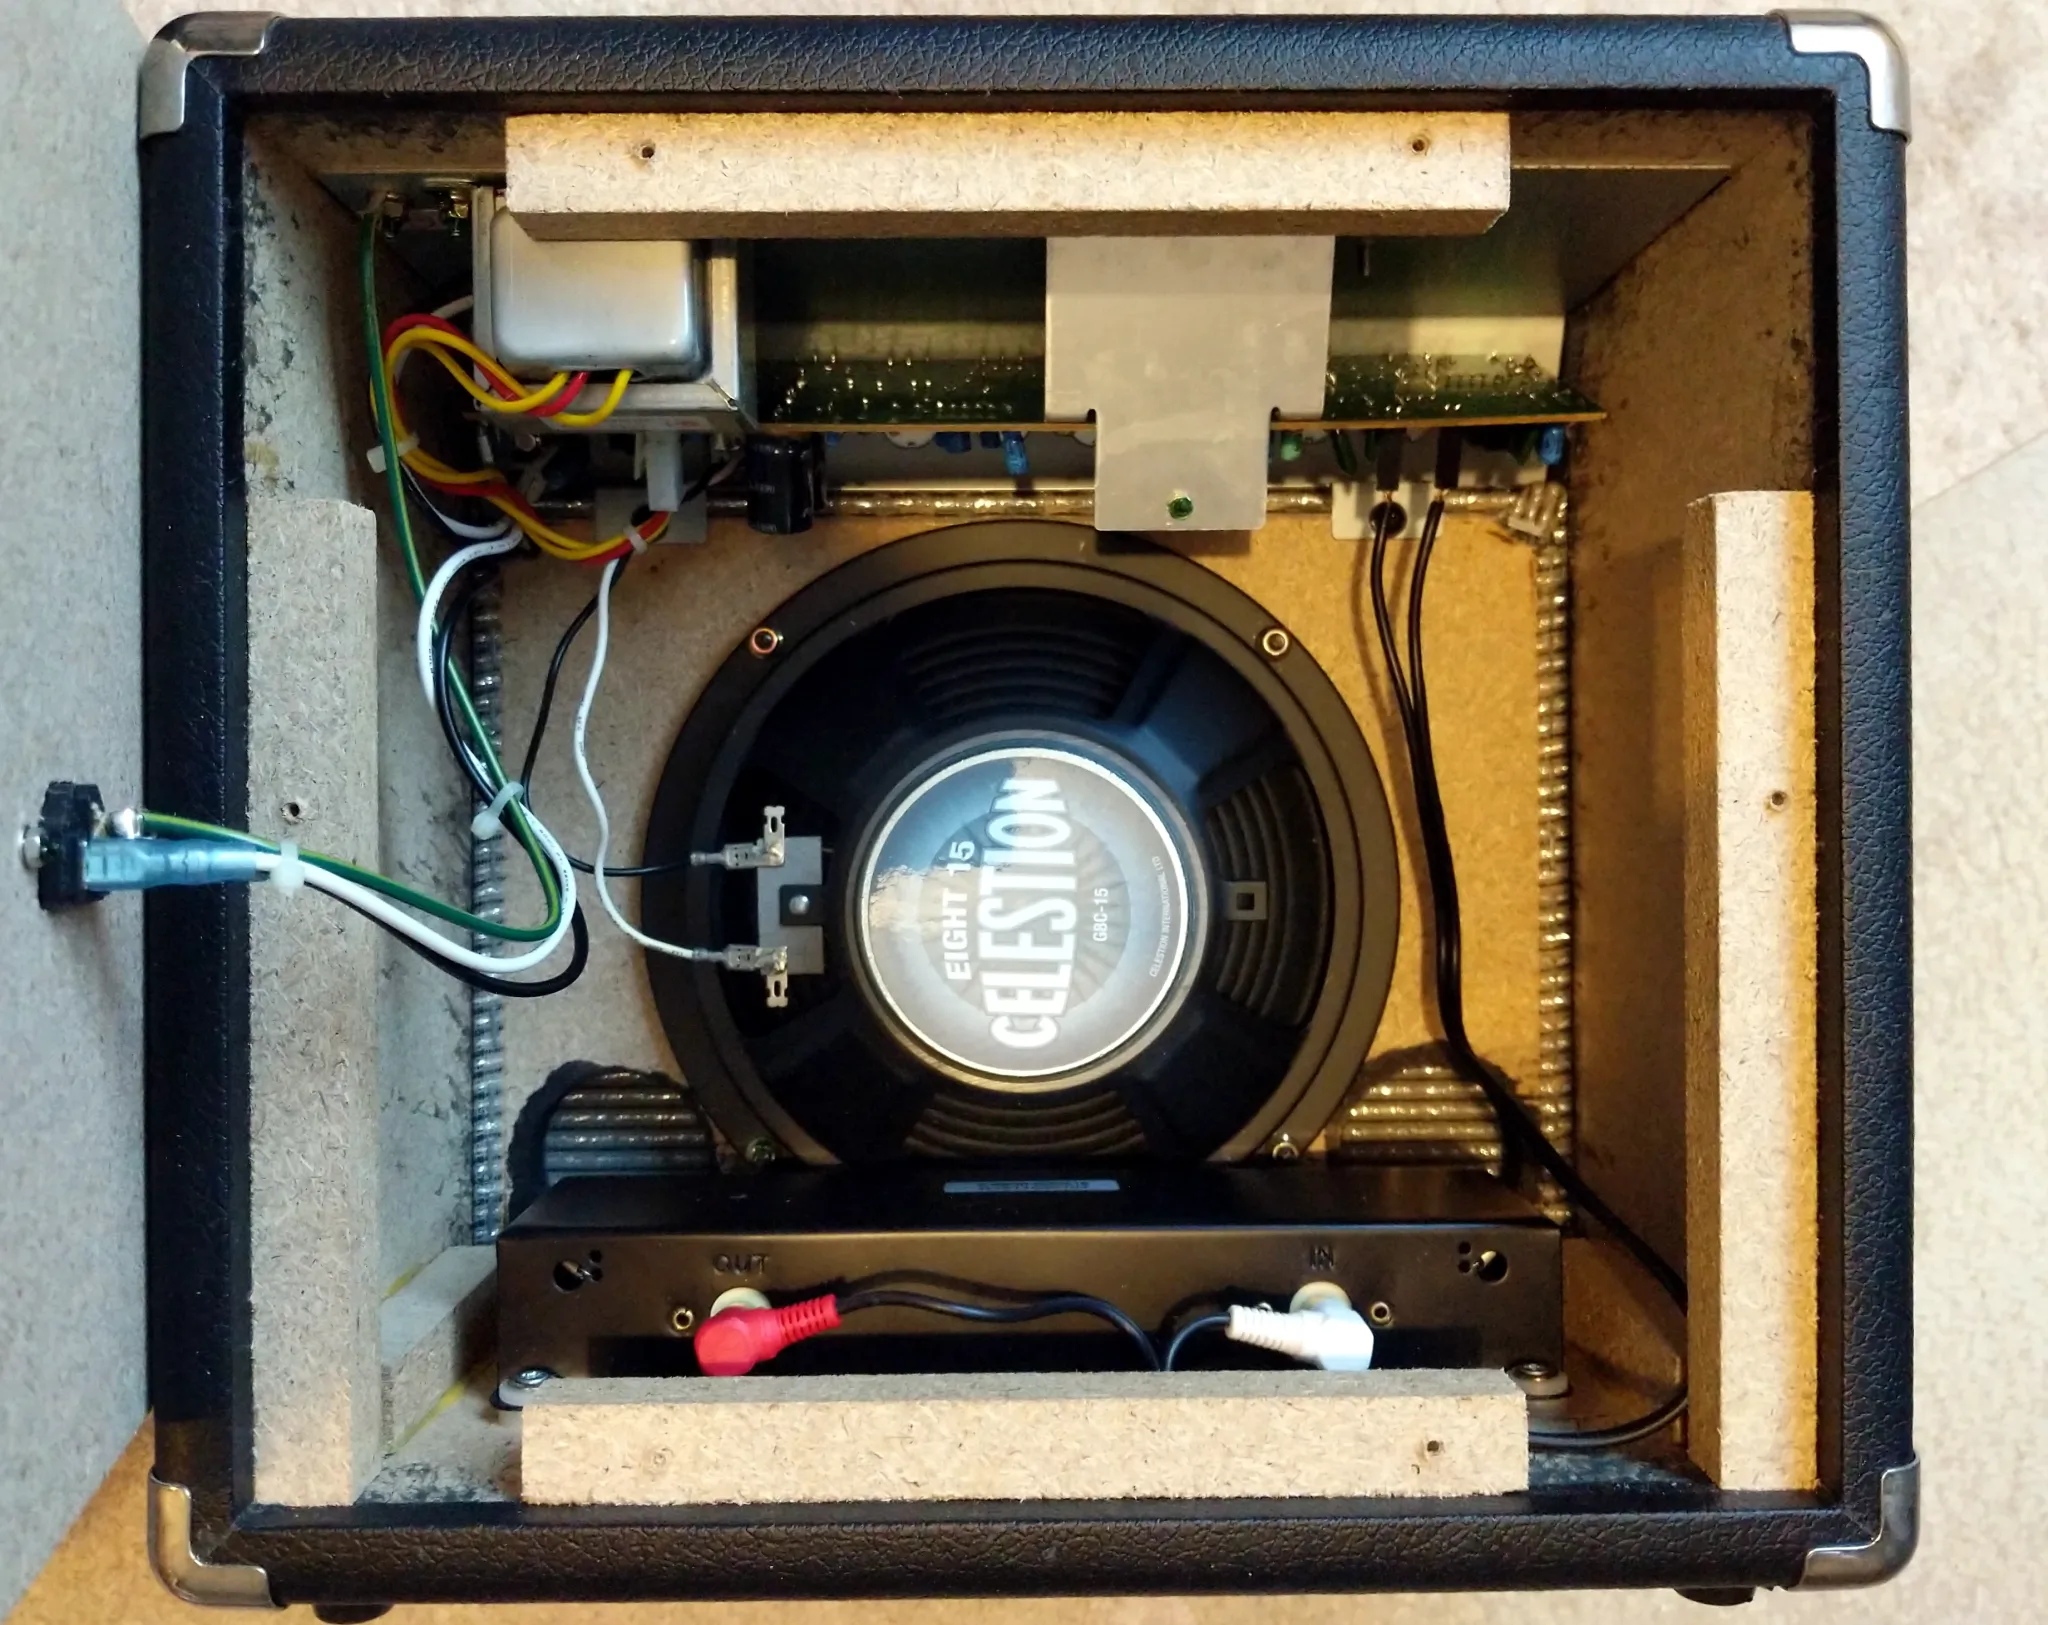 A view of the inside
of the amplifier with the new speaker. The reverb tank is installed on the
bottom, just behind the speaker.